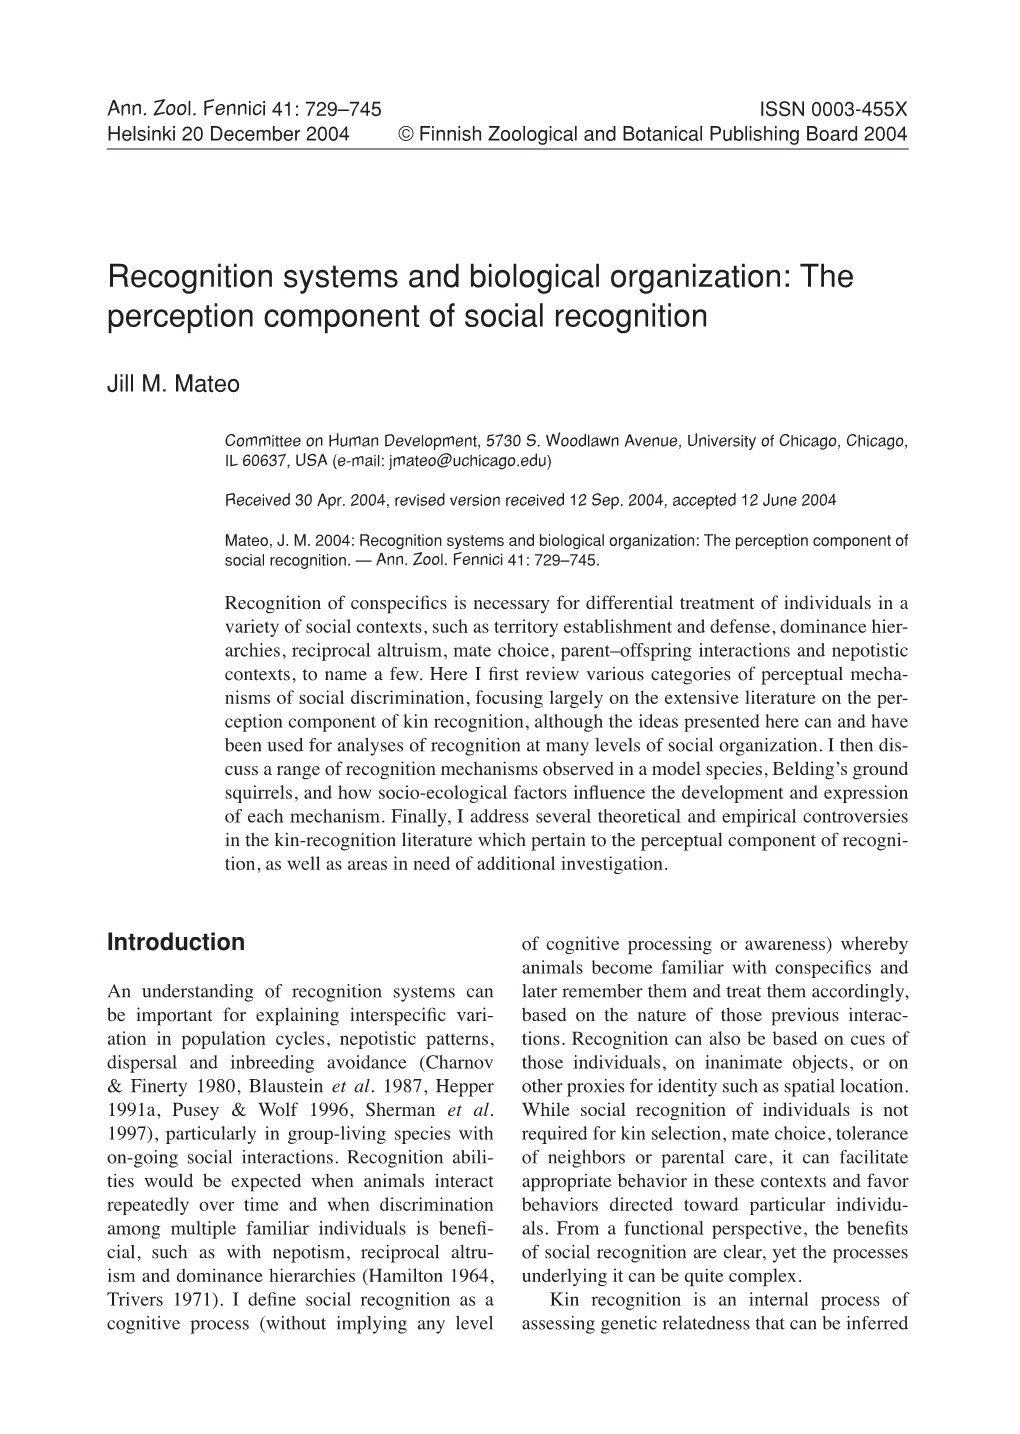 The Perception Component of Social Recognition